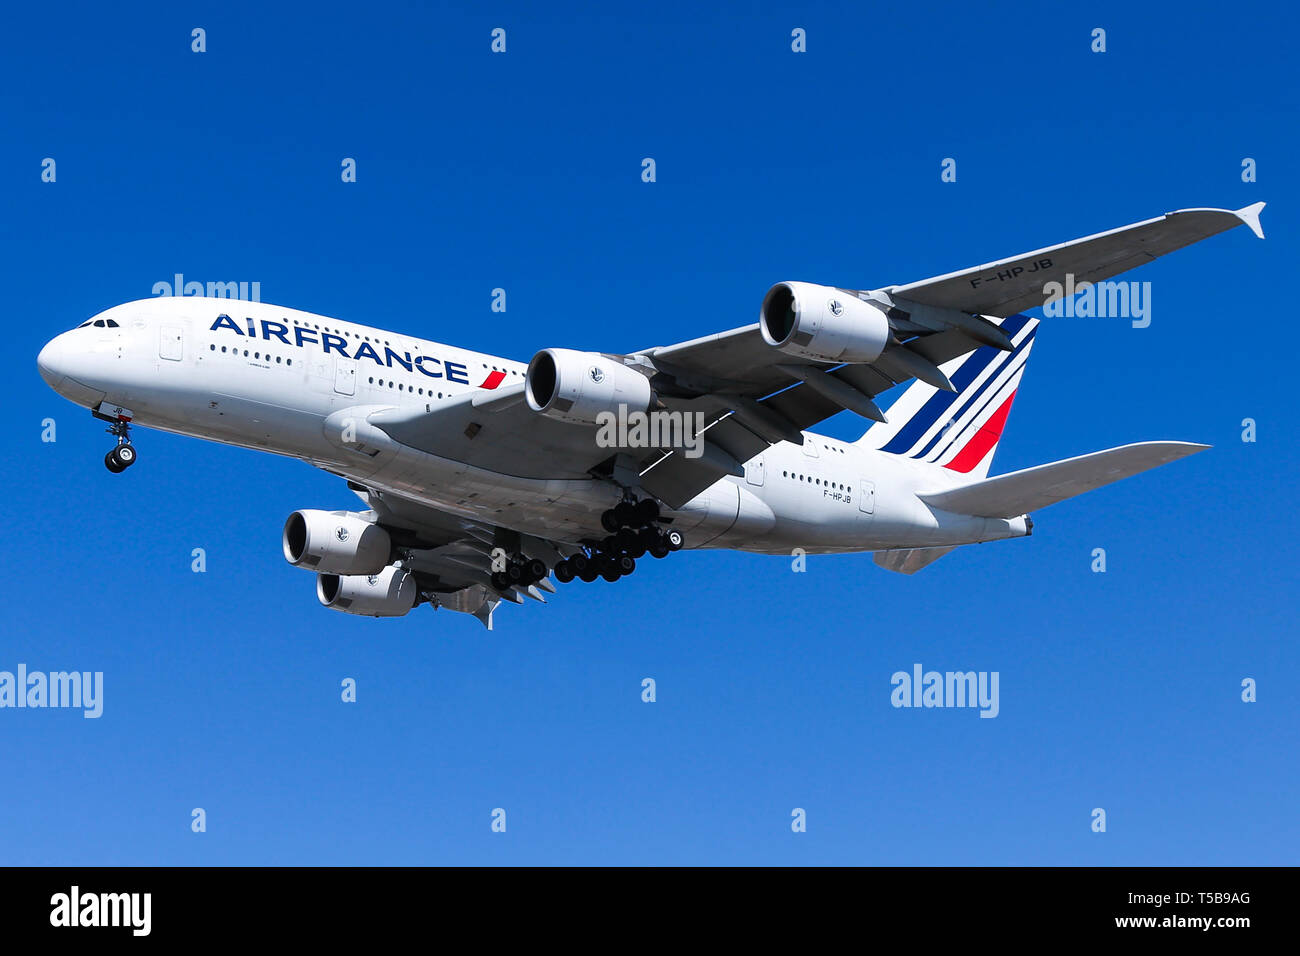 Air France Airbus A380-800 kommt in Los Angeles Airport. Stockfoto